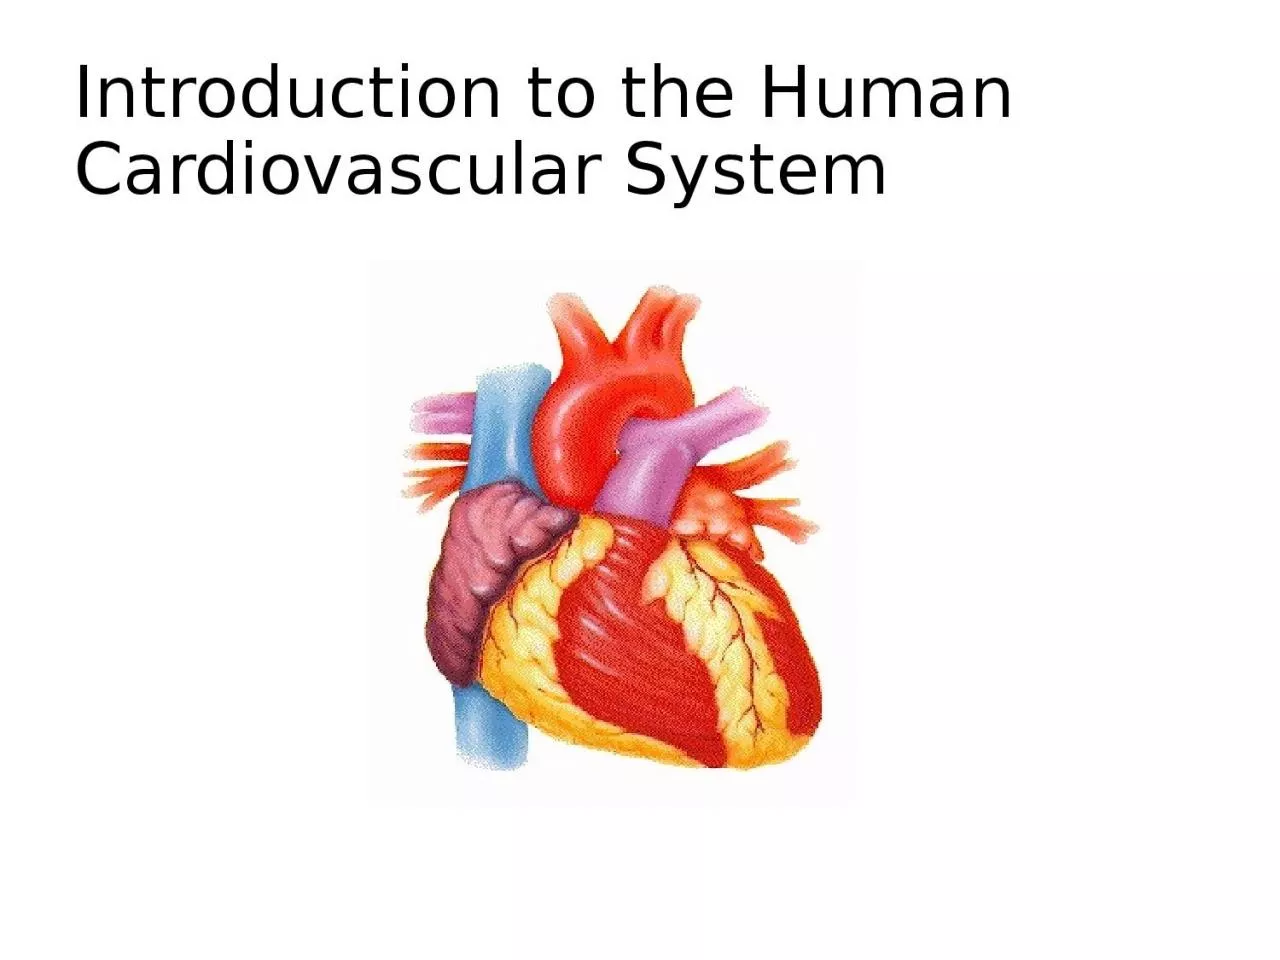 Introduction to the Human Cardiovascular System